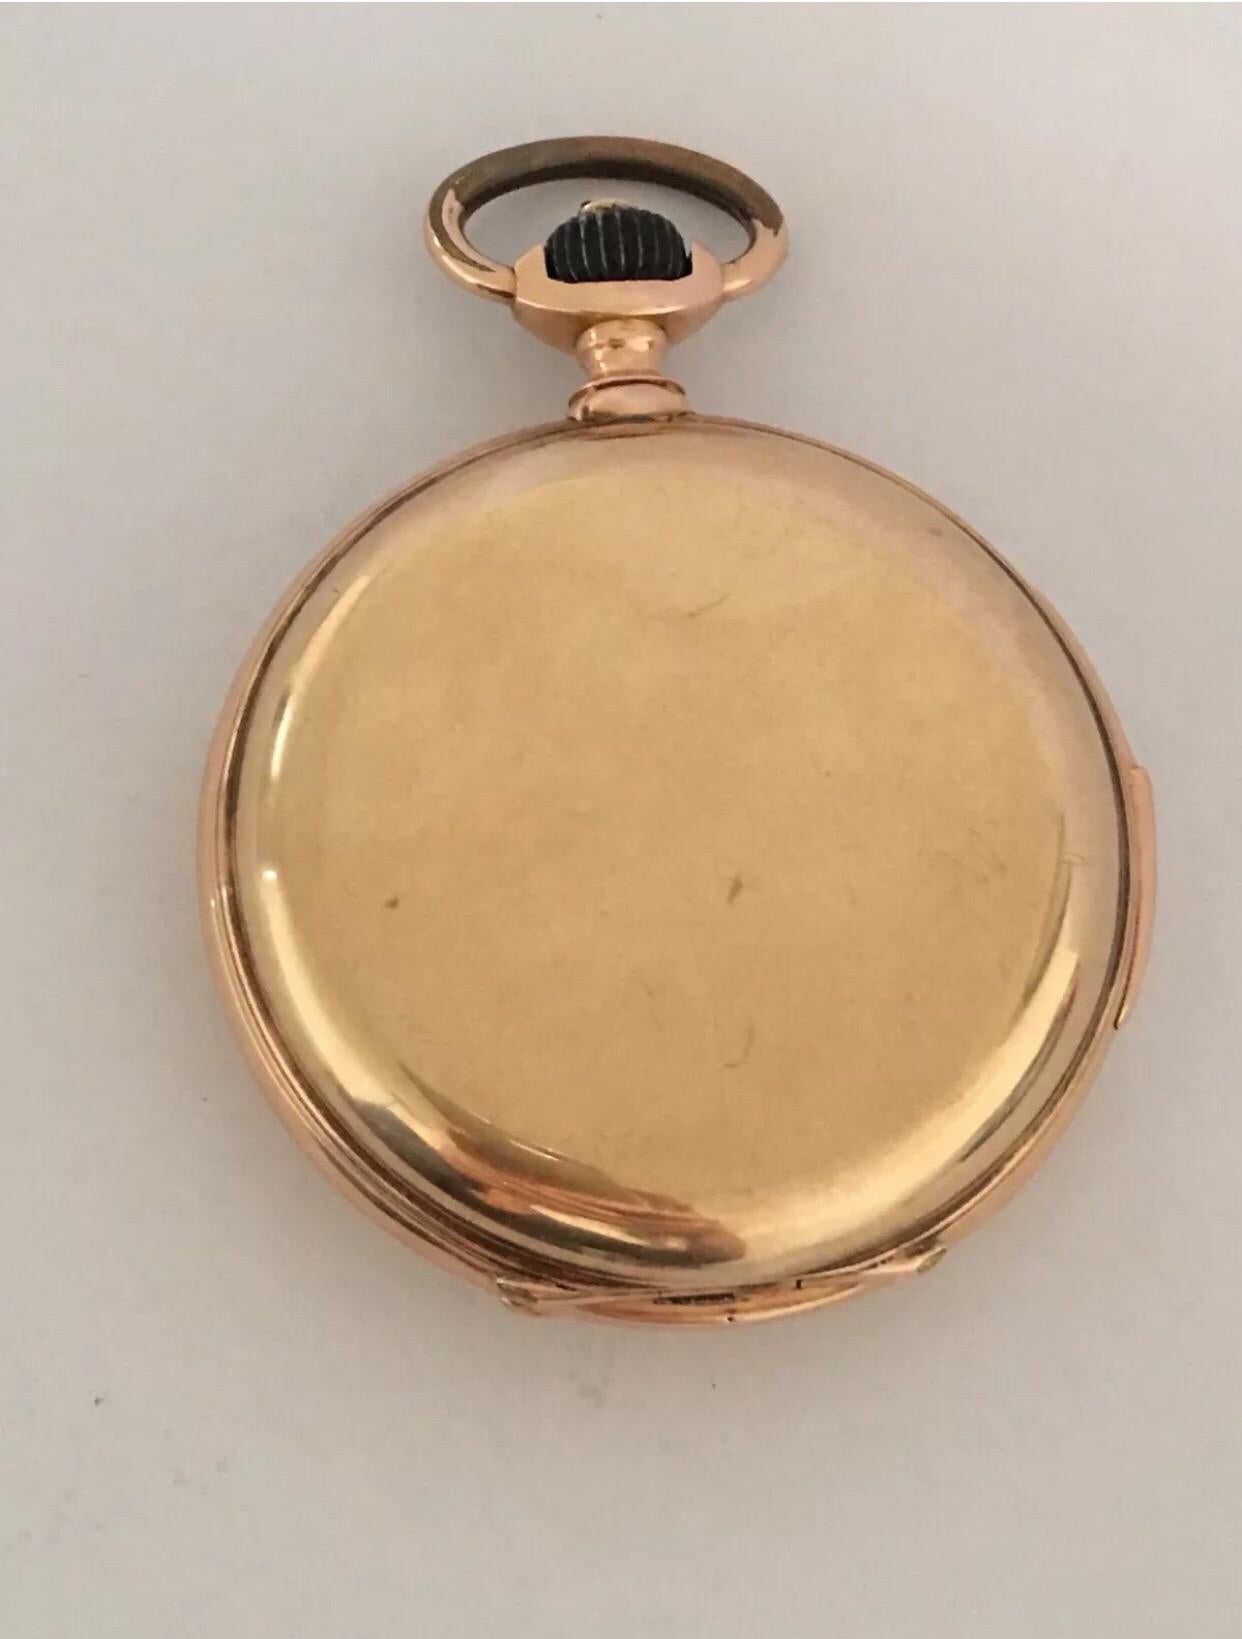 14K Gold Full hunter LeCoultre & Co Minute Repeater Antique pocket watch.

A lovely 14- karat Gold minute repeating antique pocket watch. It is in good working condition. A clean white enamel face with Arabic numerals and sub-seconds outer minutes,